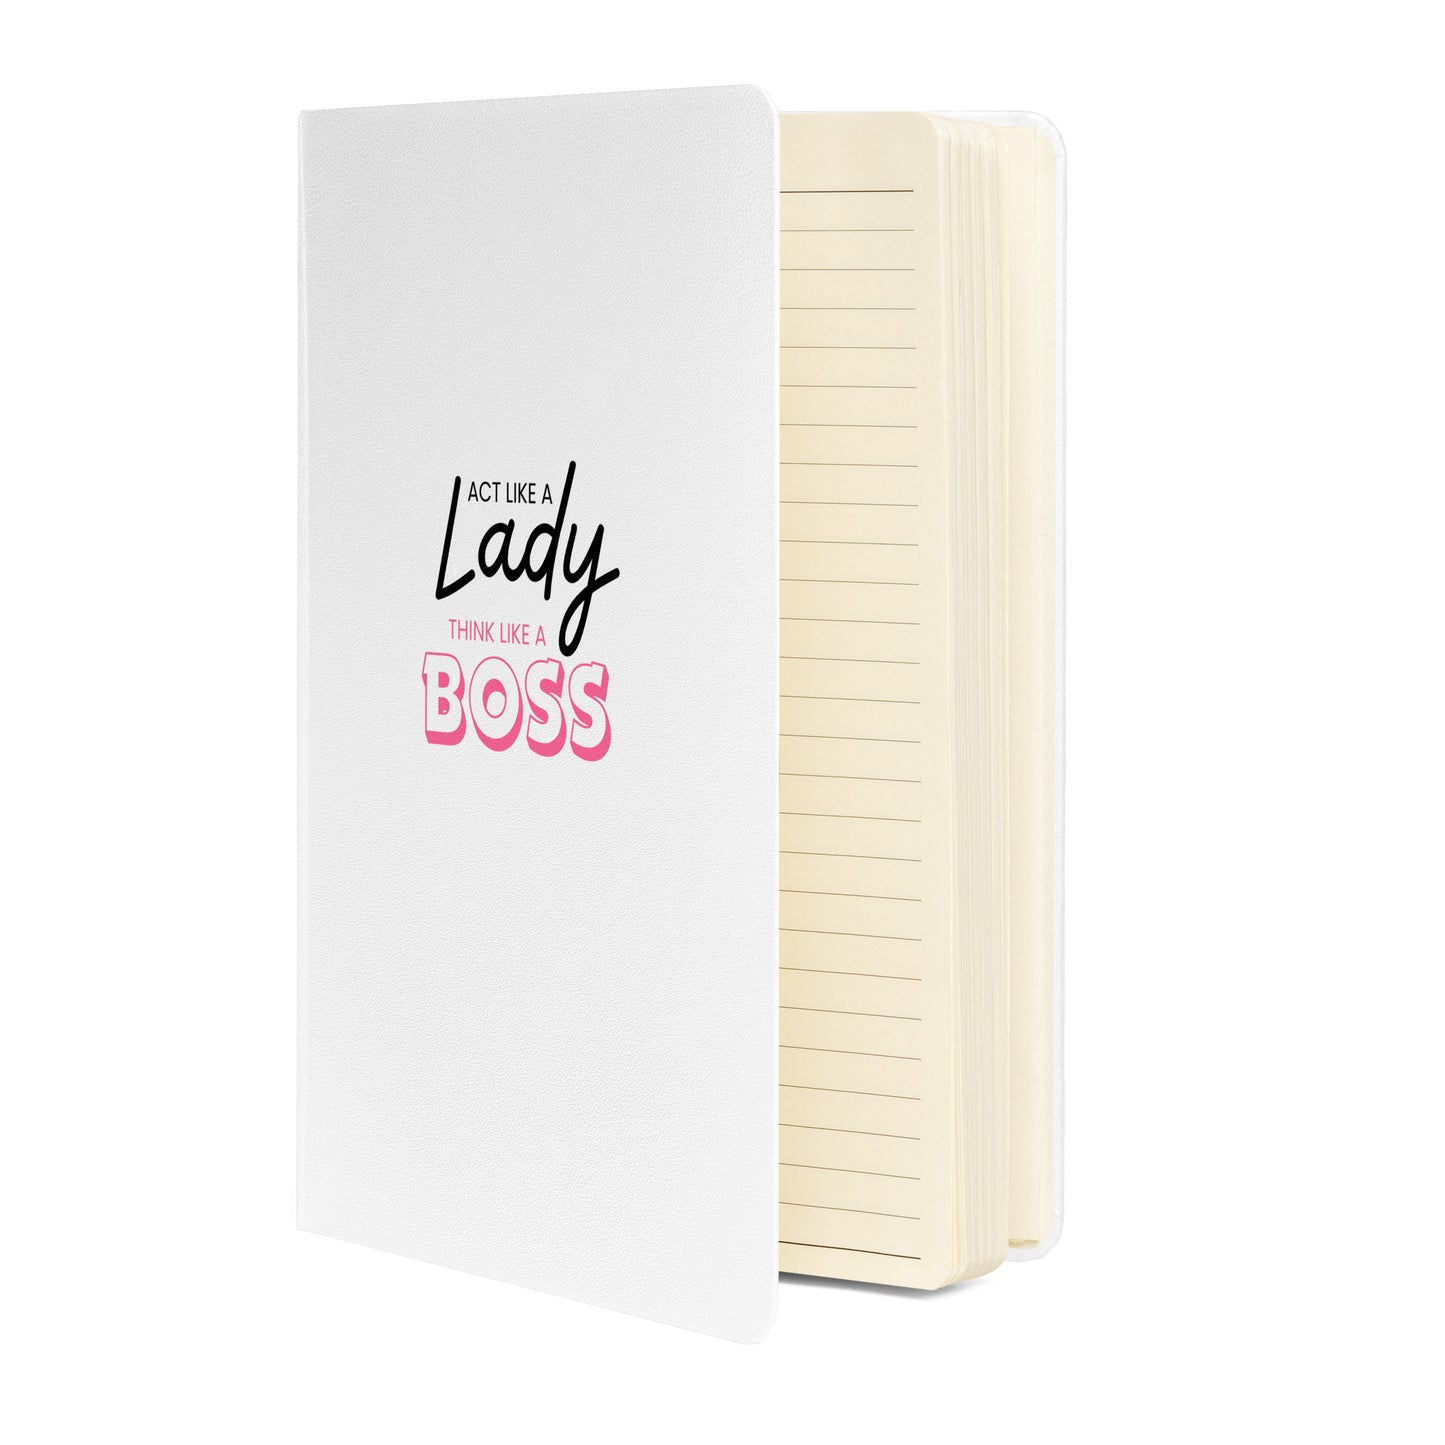 Act Like a Lady, Think Like A Boss Hardcover Notebook - Lined